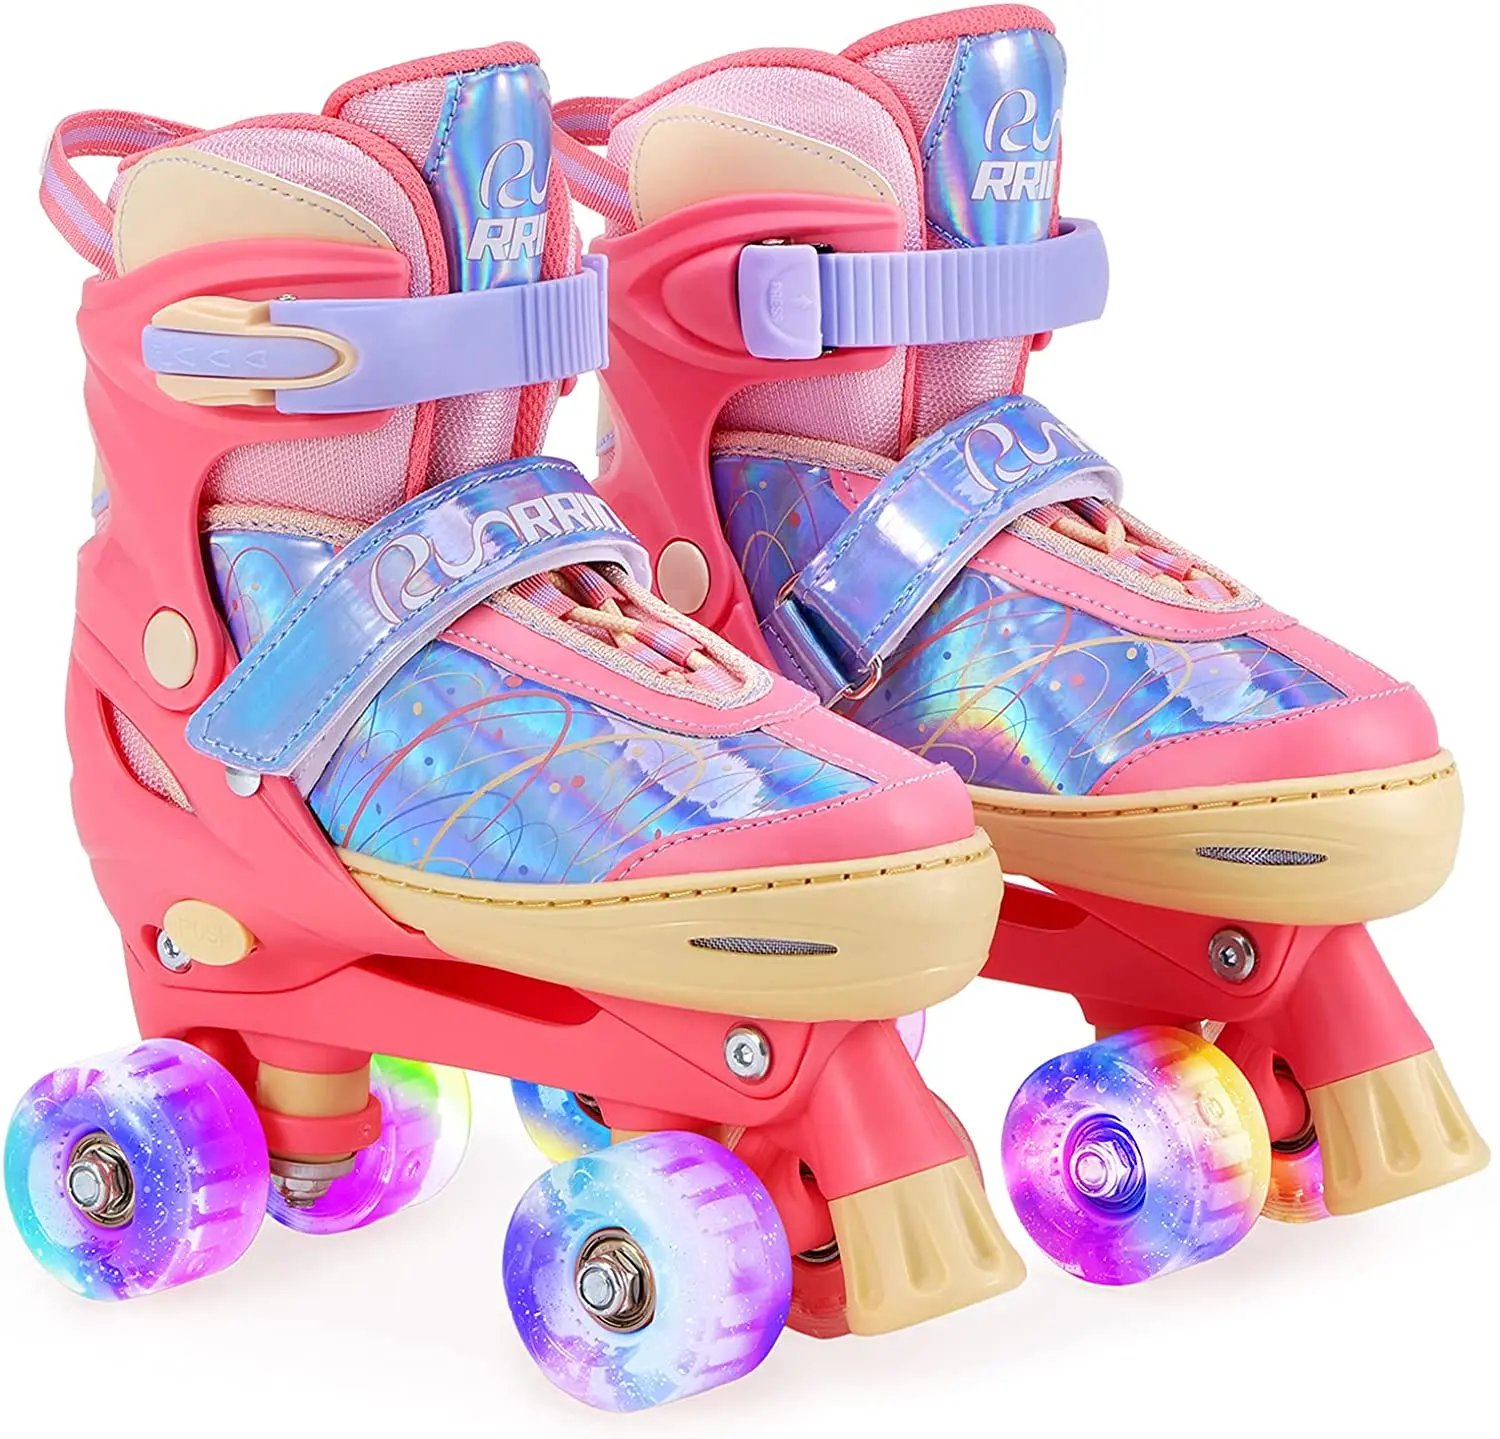 4-Pejiijar Kids Quad Roller Skate,Roller Skates for Girls Boys,with Adjustable Size&Double Brakes&Luminous Wheels&Protective Gear,3-Point Balance Roller Shoes for Beginners 